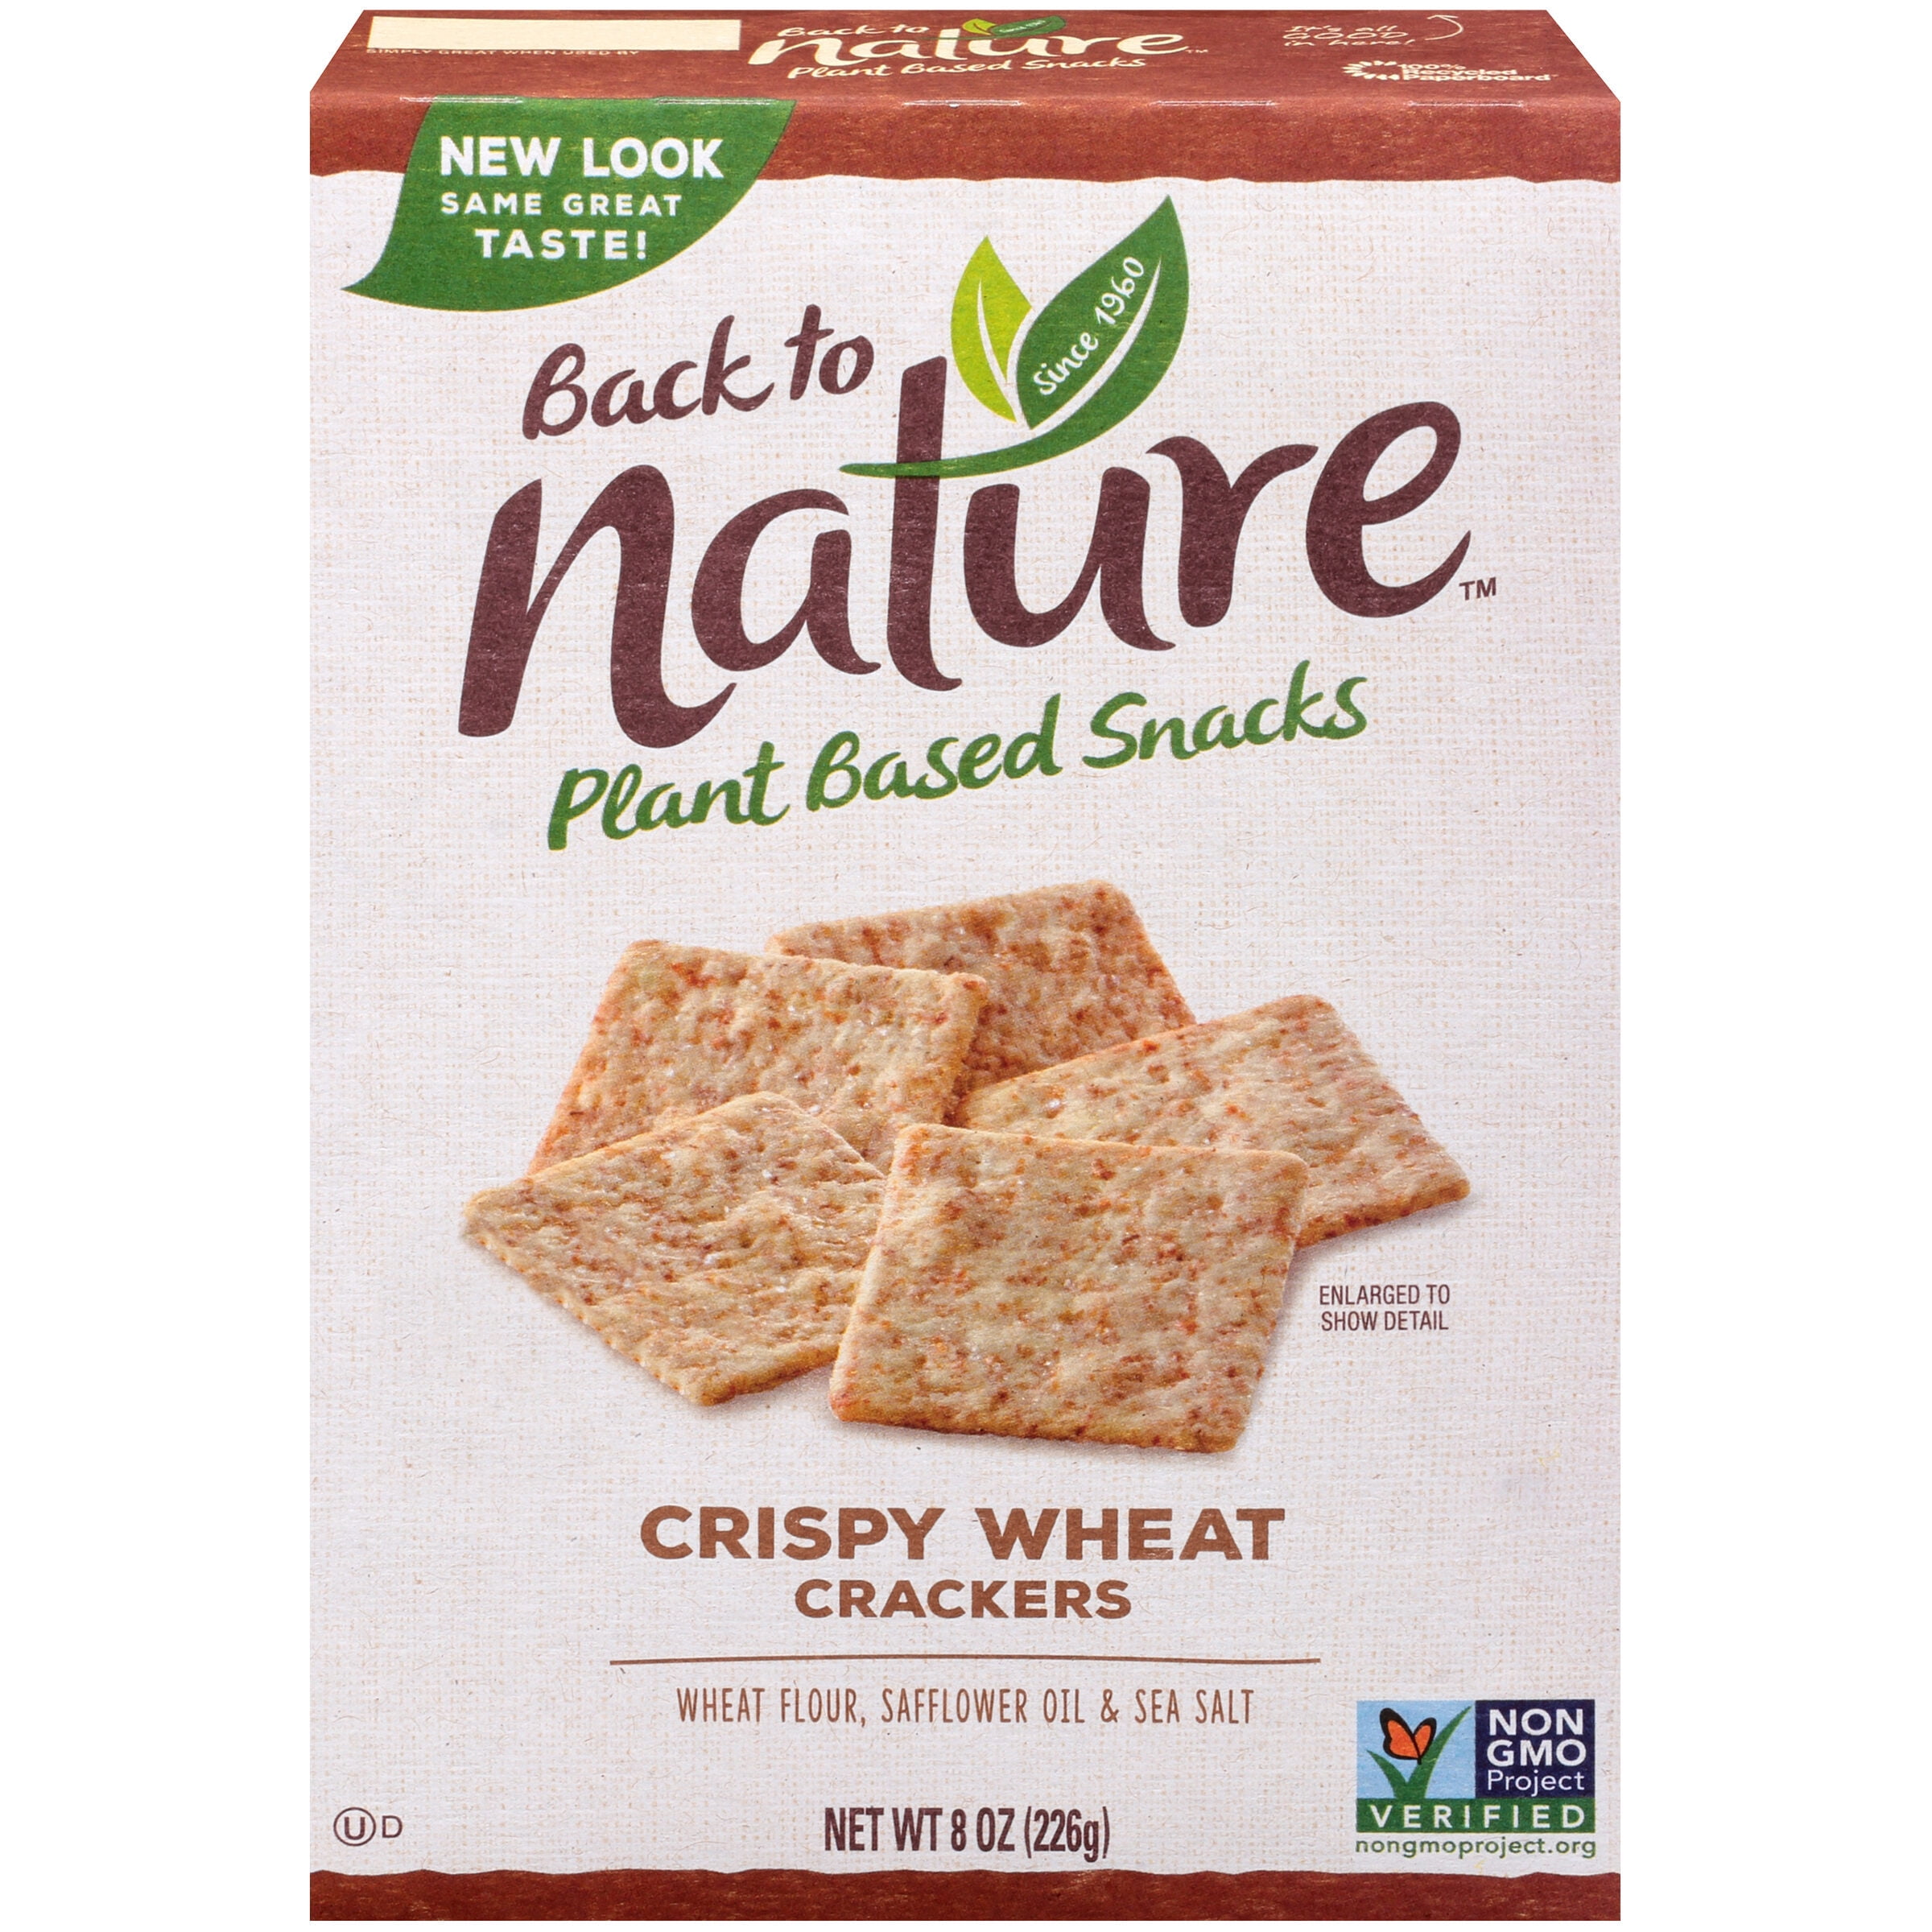 Photo 1 of 2PC LOT
Back to Nature Plant Based Snacks Crispy Wheat Crackers 8 oz. Box, 2 COUNT
EXP 09/09/2021